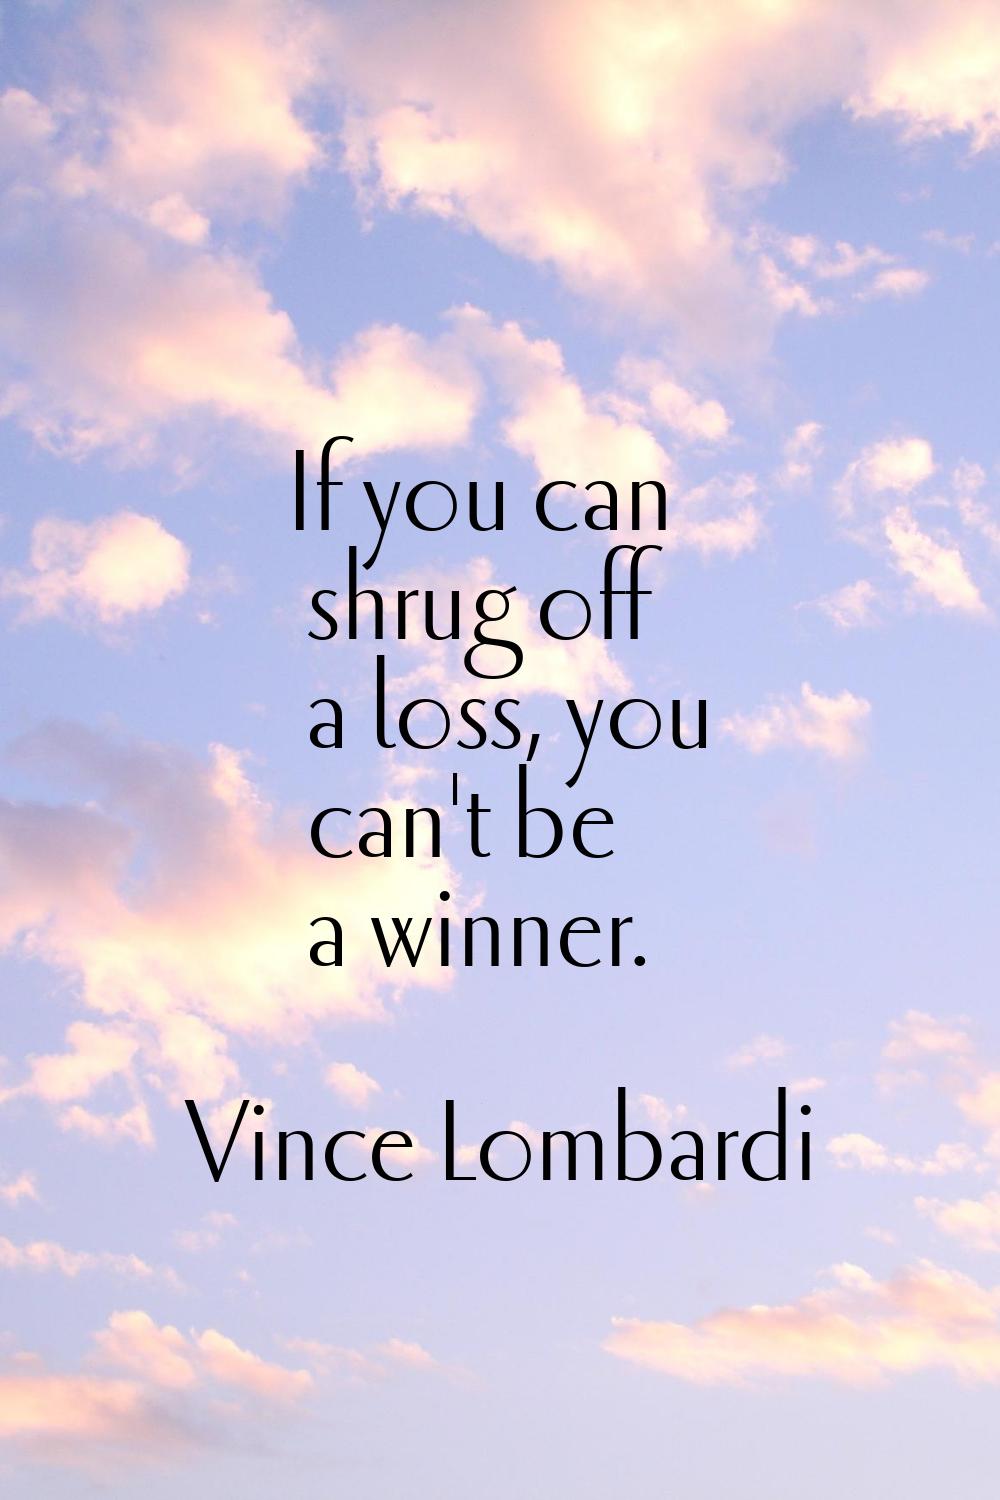 If you can shrug off a loss, you can't be a winner.